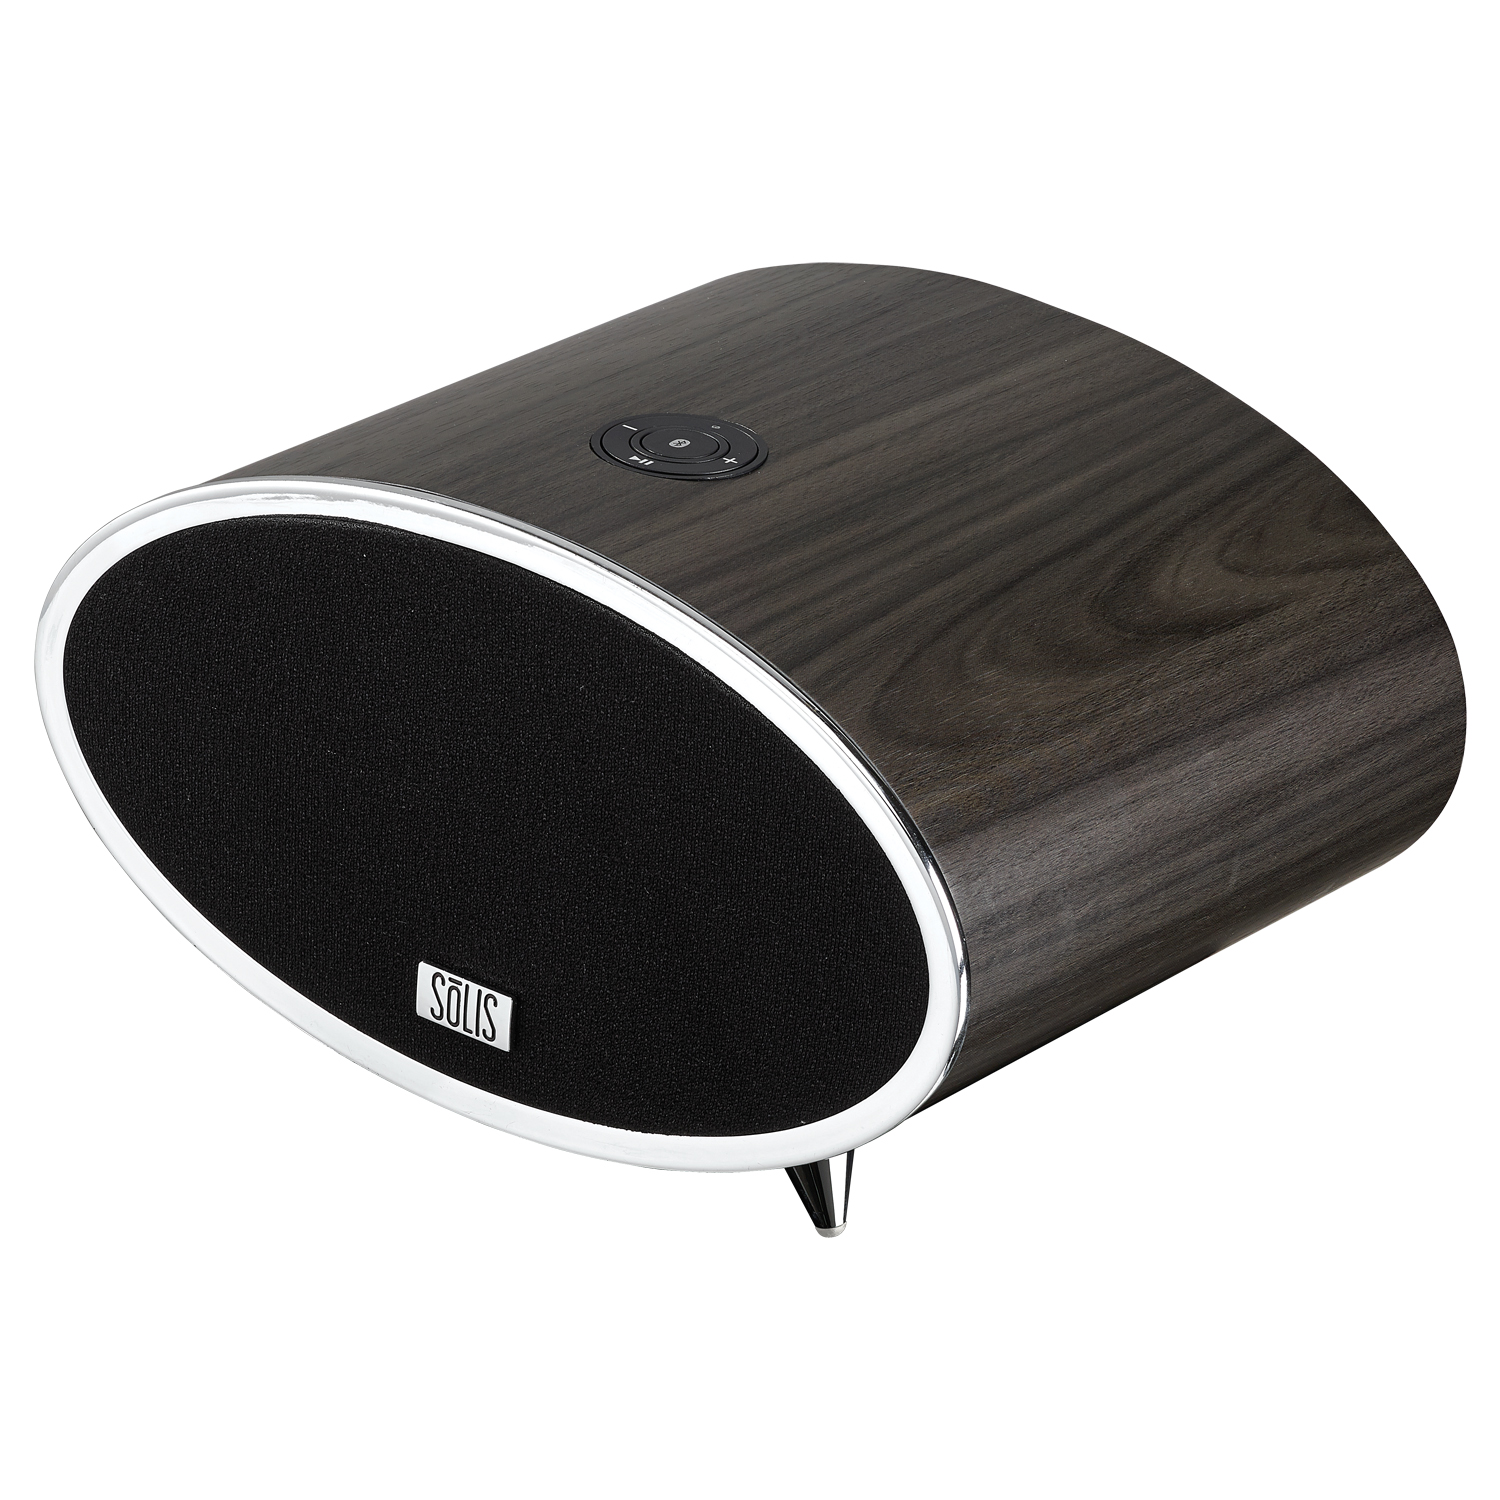 Solis SO-6000 Bluetooth/Wi-Fi Wireless Stereo Smart Speaker with Chromecast Built-in - image 4 of 7